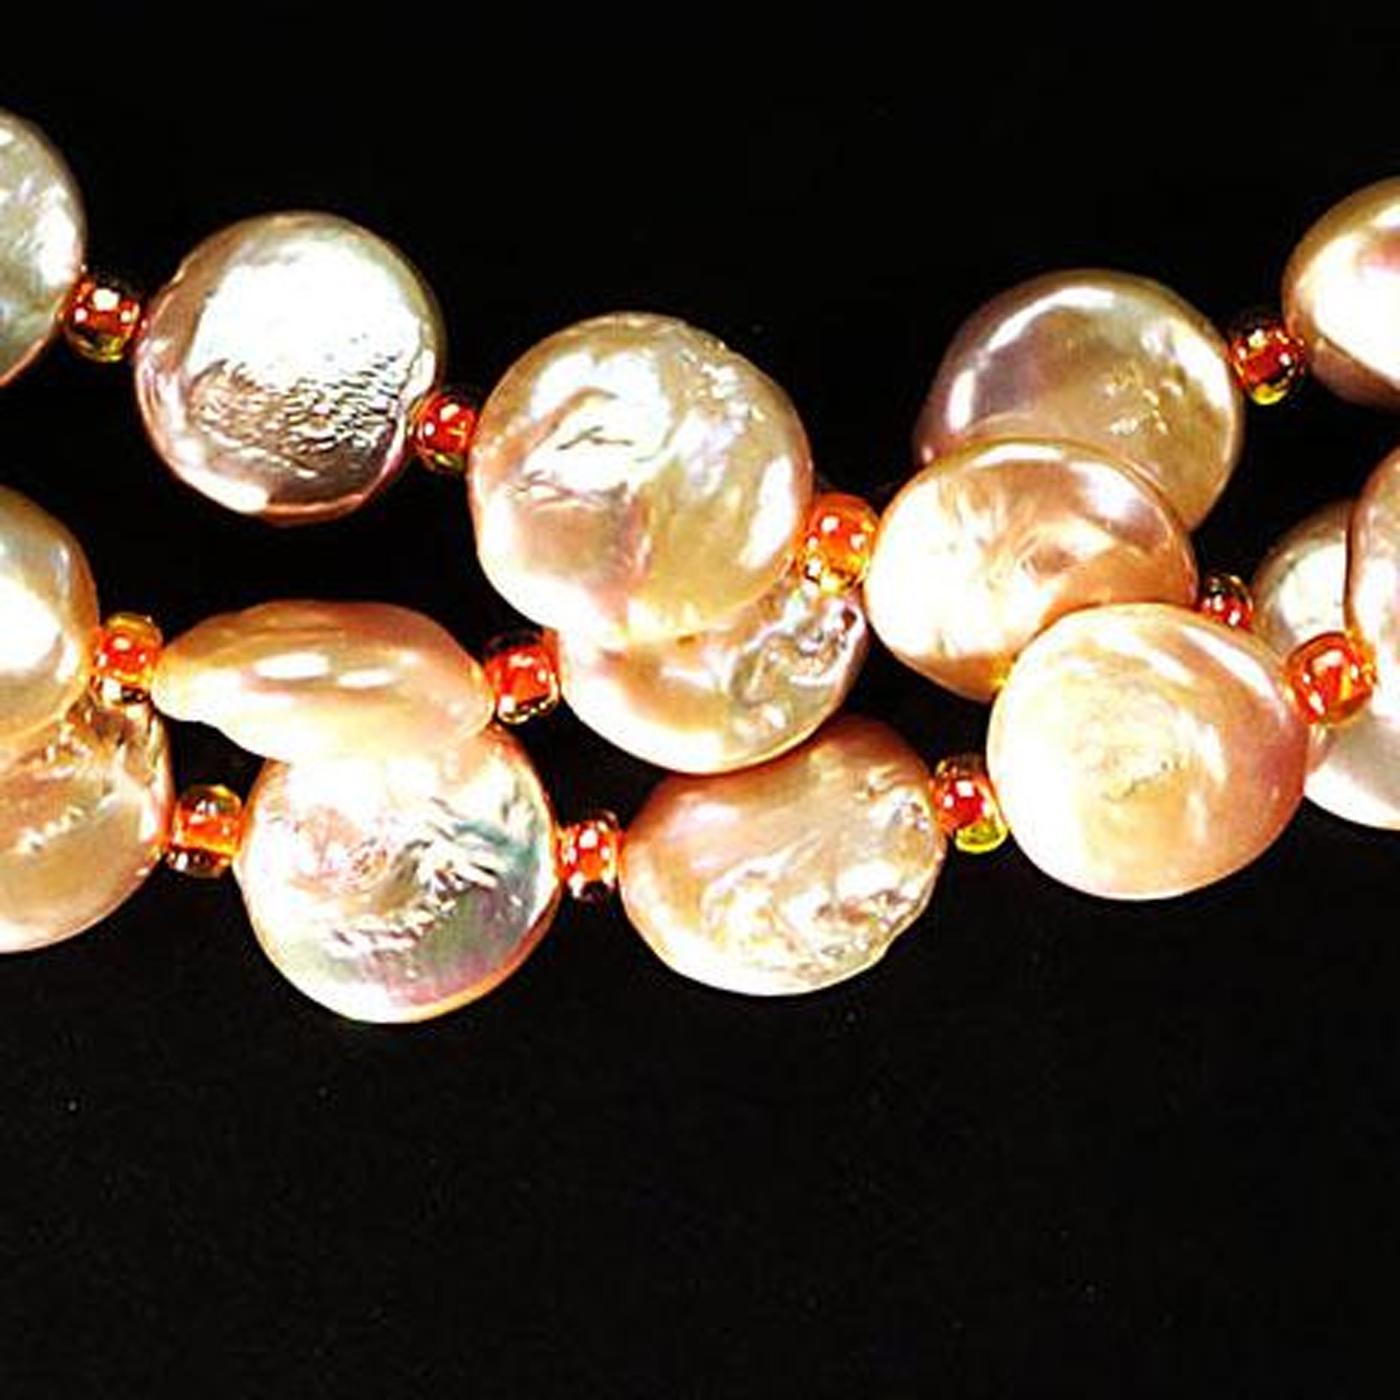 Bead AJD Triple Strand Coin Pearl Necklace in Peachy/Pink June Birthstone  Great Gift For Sale